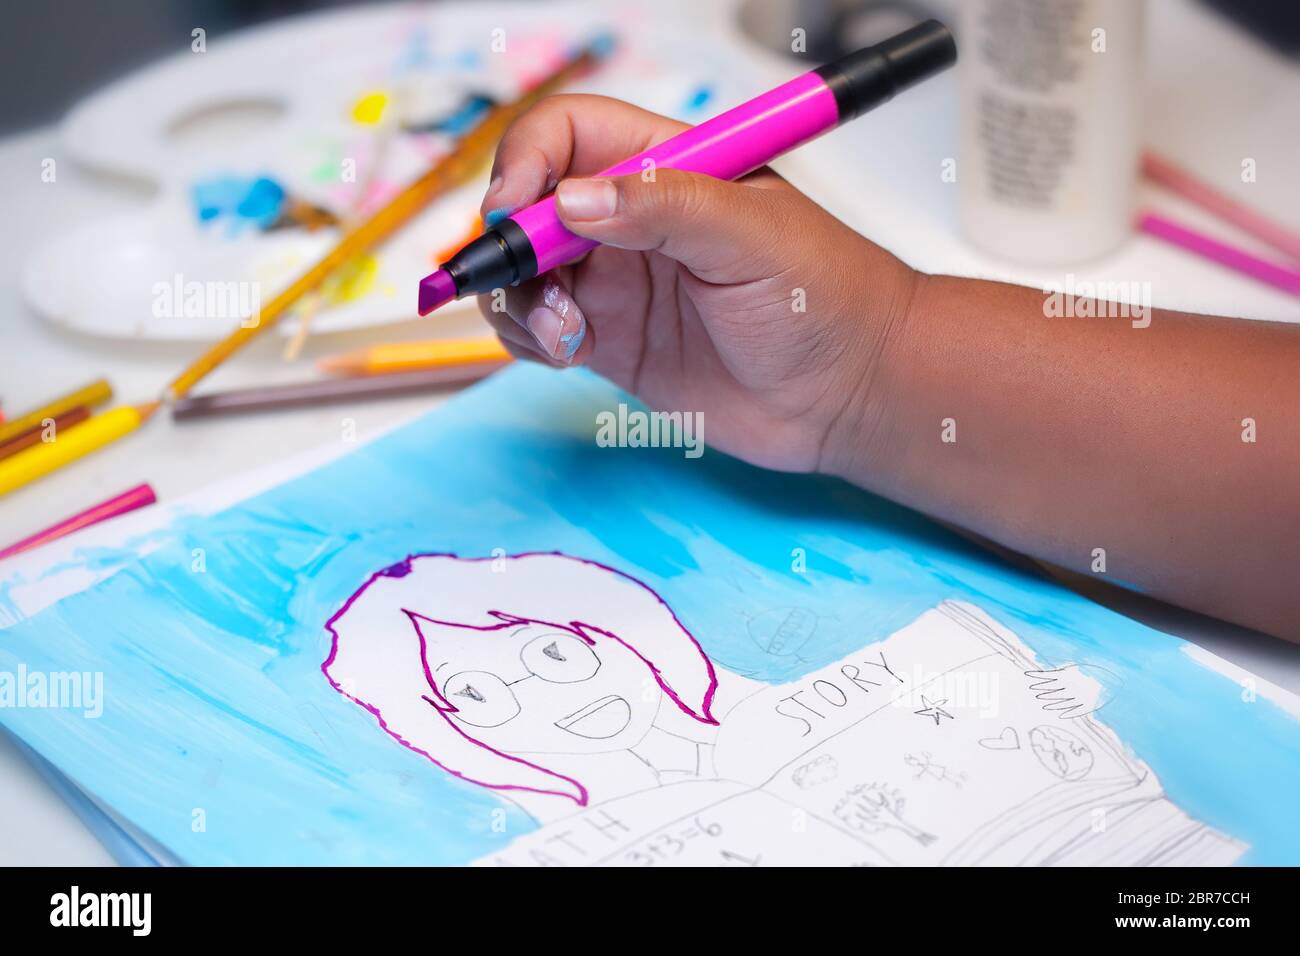 A little kids hand holding a pink art marker and coloring inside the lines of a hand drawn illustration using mixed media. Stock Photo